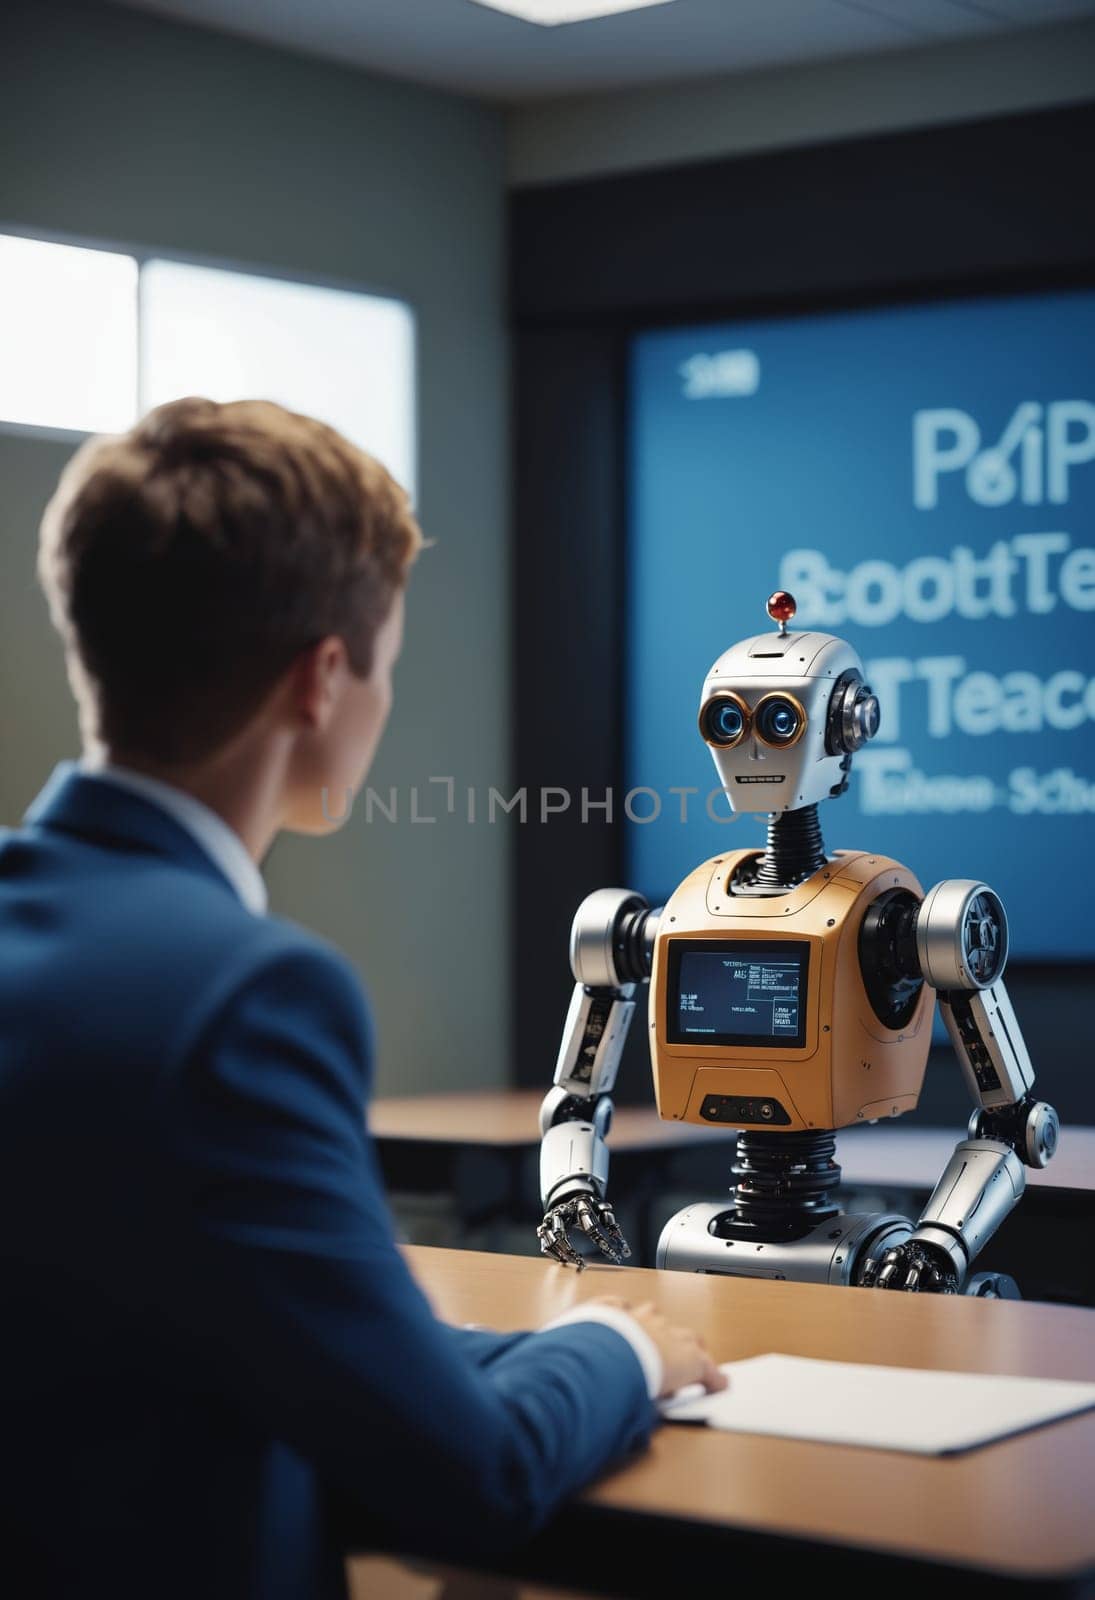 A man is conversing with a robot while seated at a table. The interaction involves office equipment, engineering, and a display device